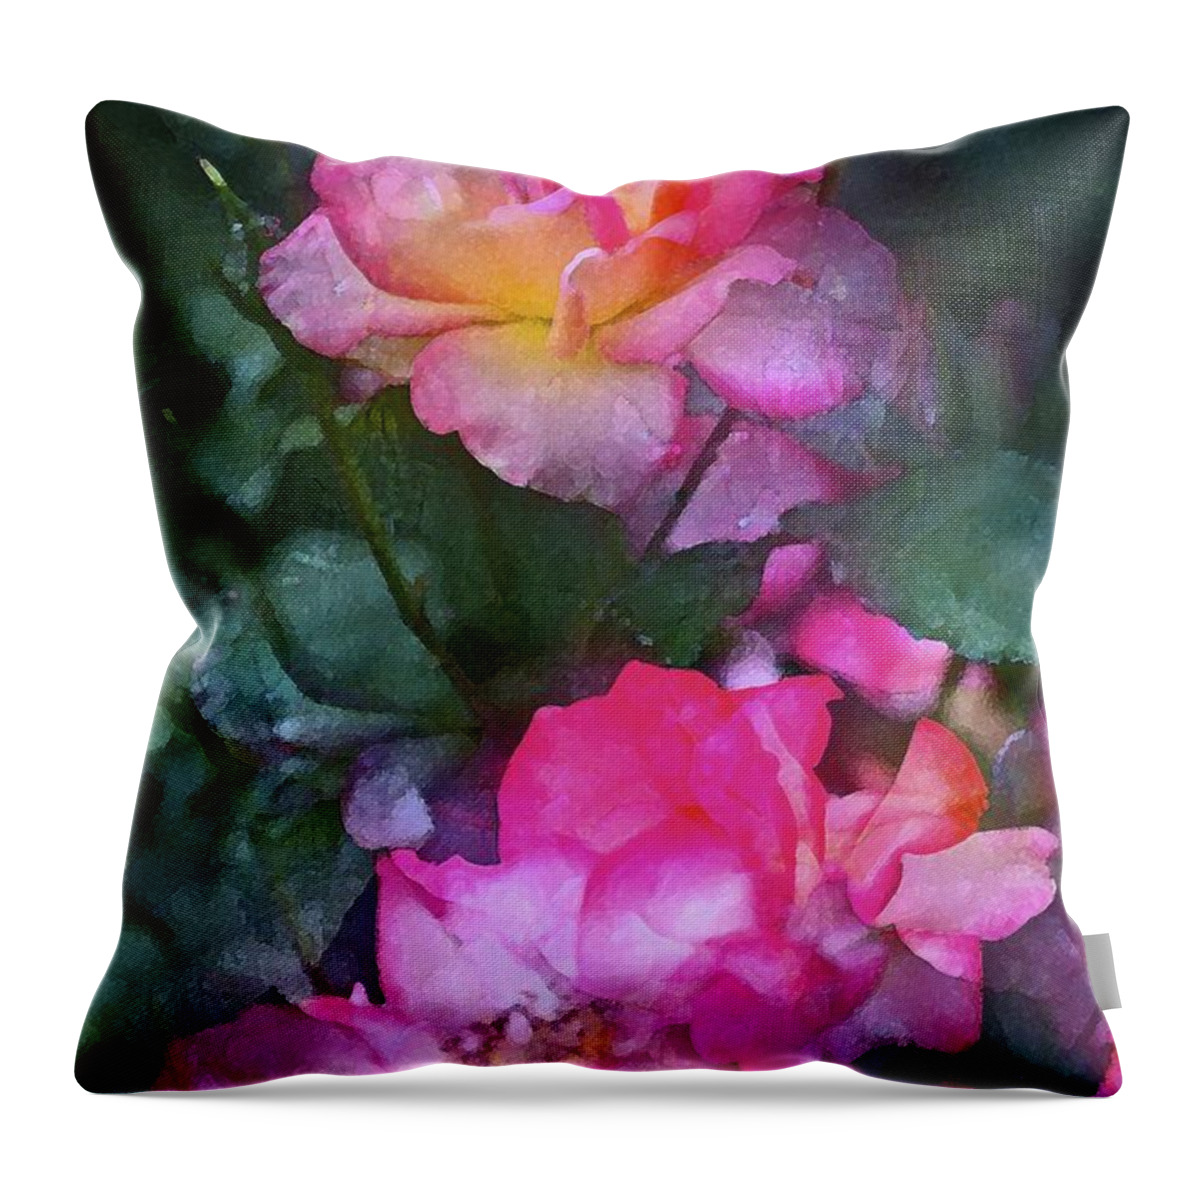 Floral Throw Pillow featuring the photograph Rose 242 by Pamela Cooper